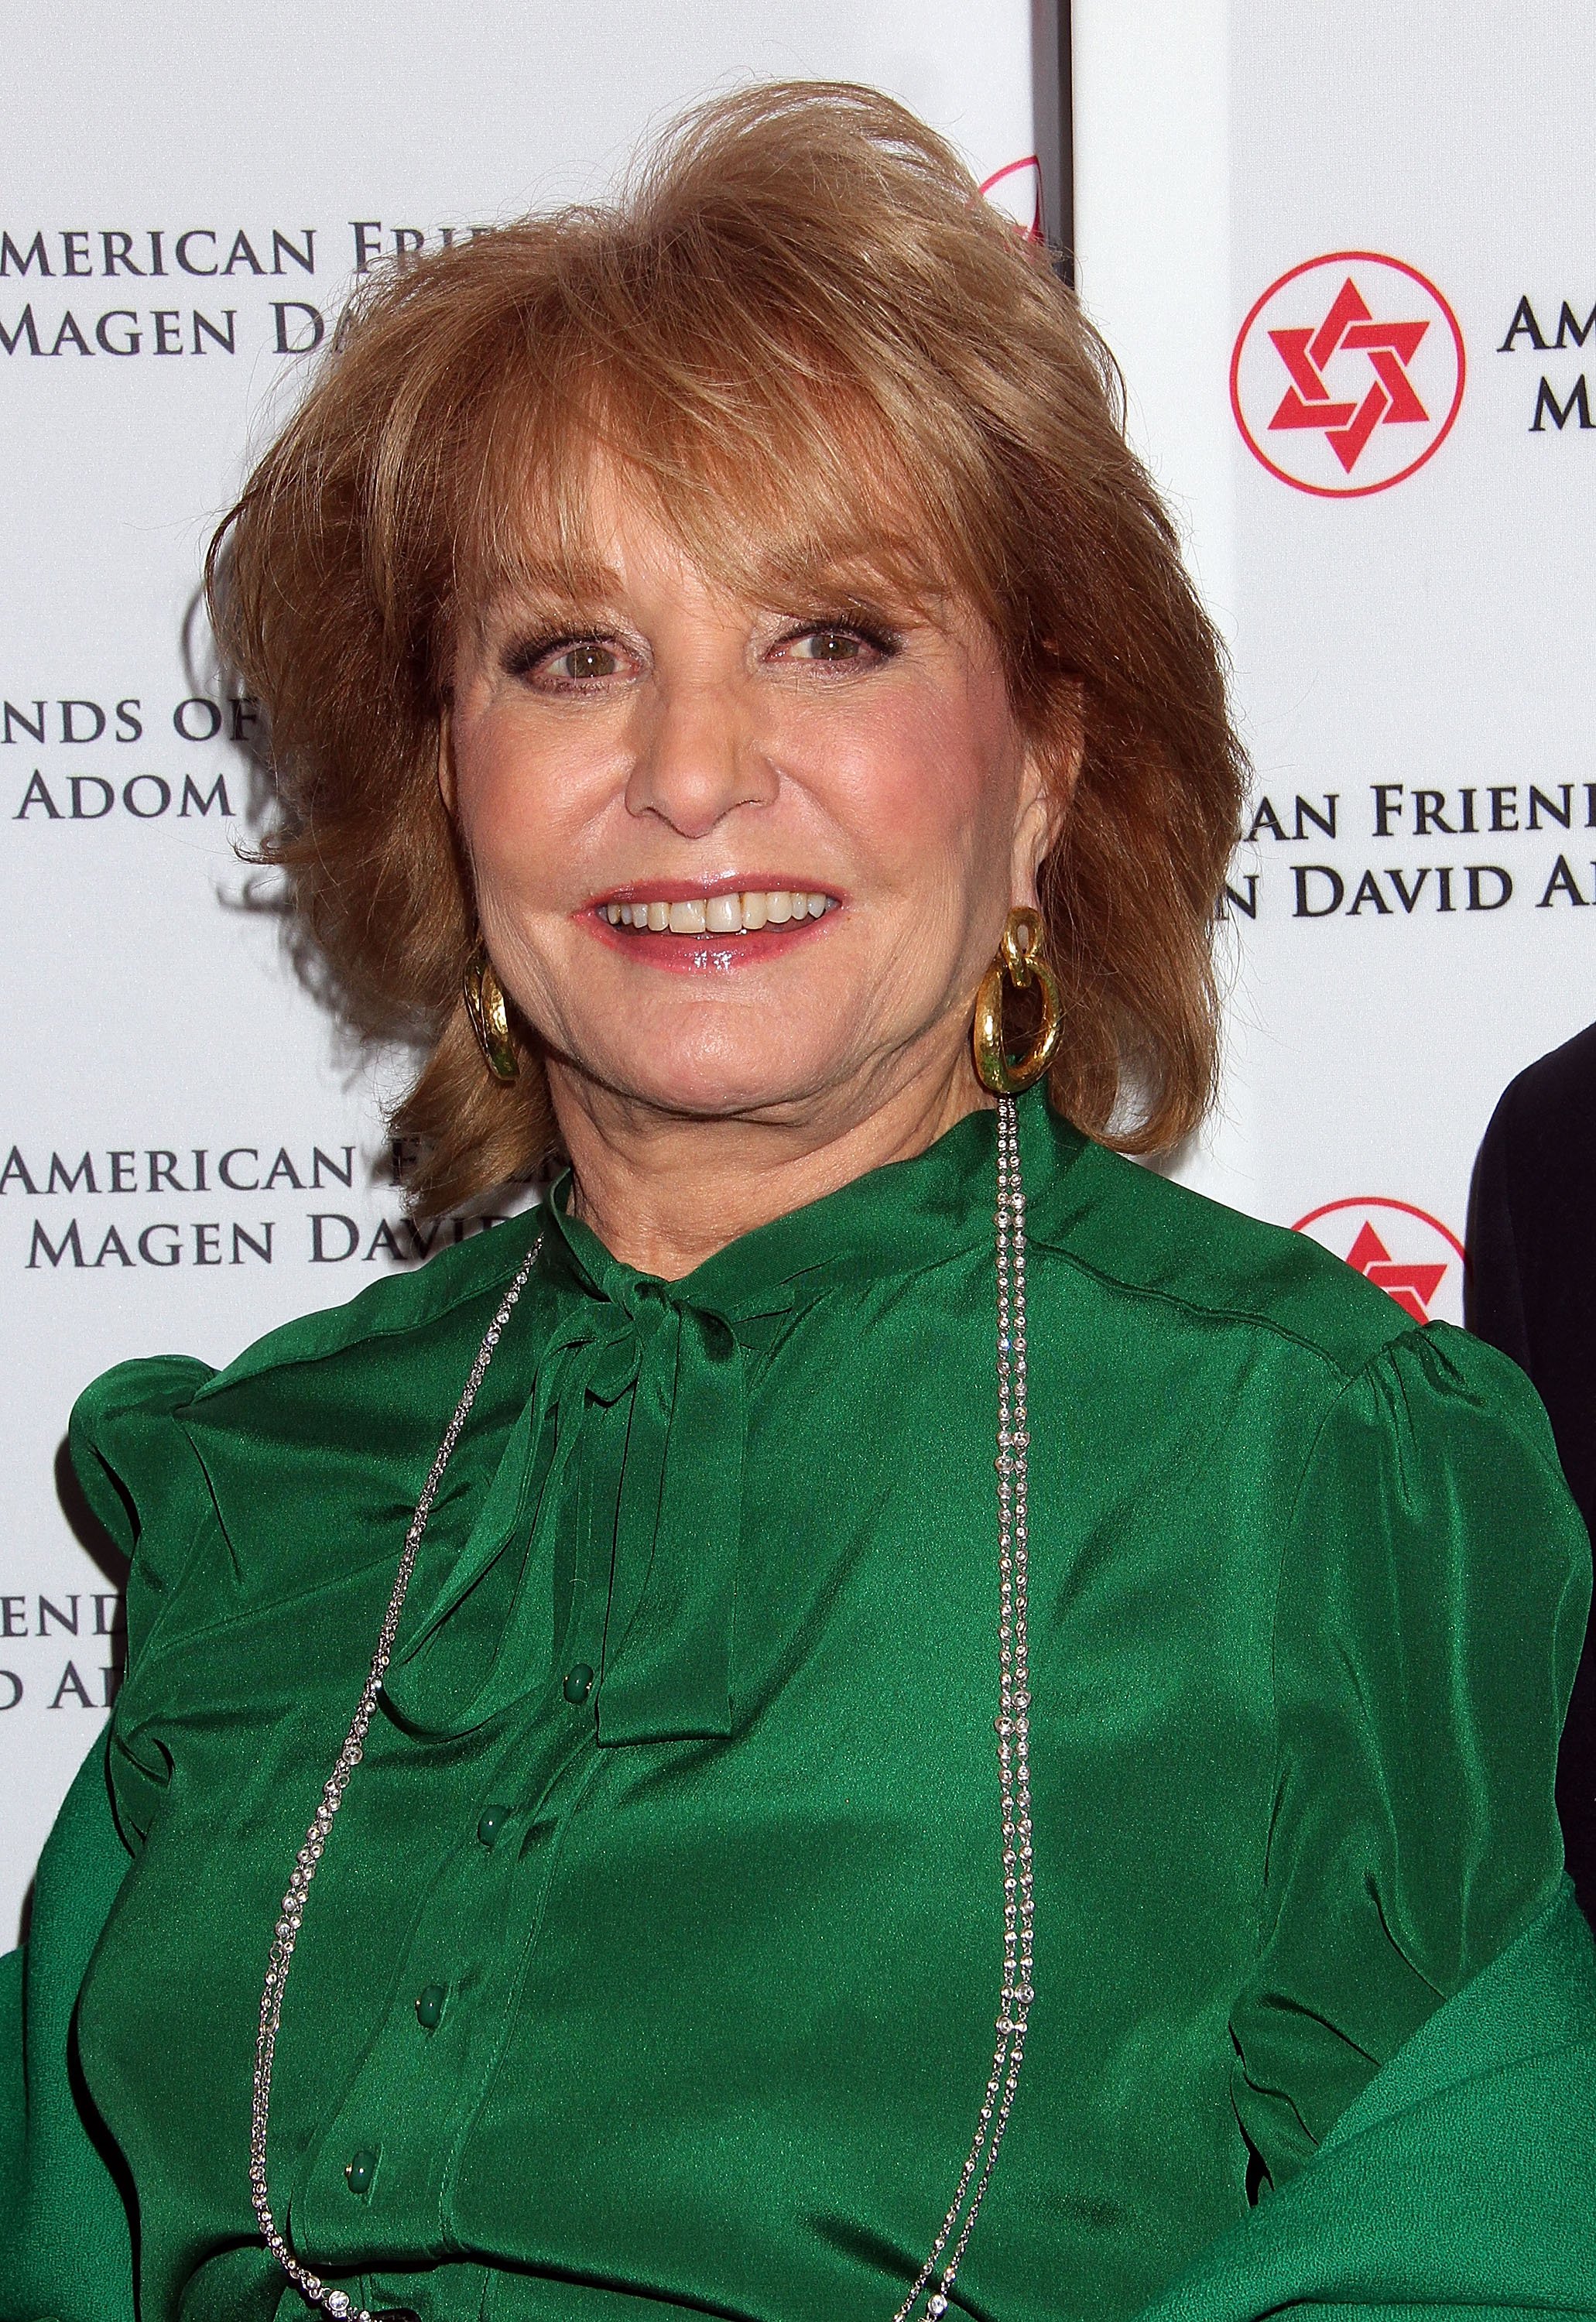 Barbara Walters attending the American Friends Of Magen David Adom Annual Benefit Dinner at The Lighthouse at Chelsea Piers on December 2, 2014 in New York City. / Source: Getty Images